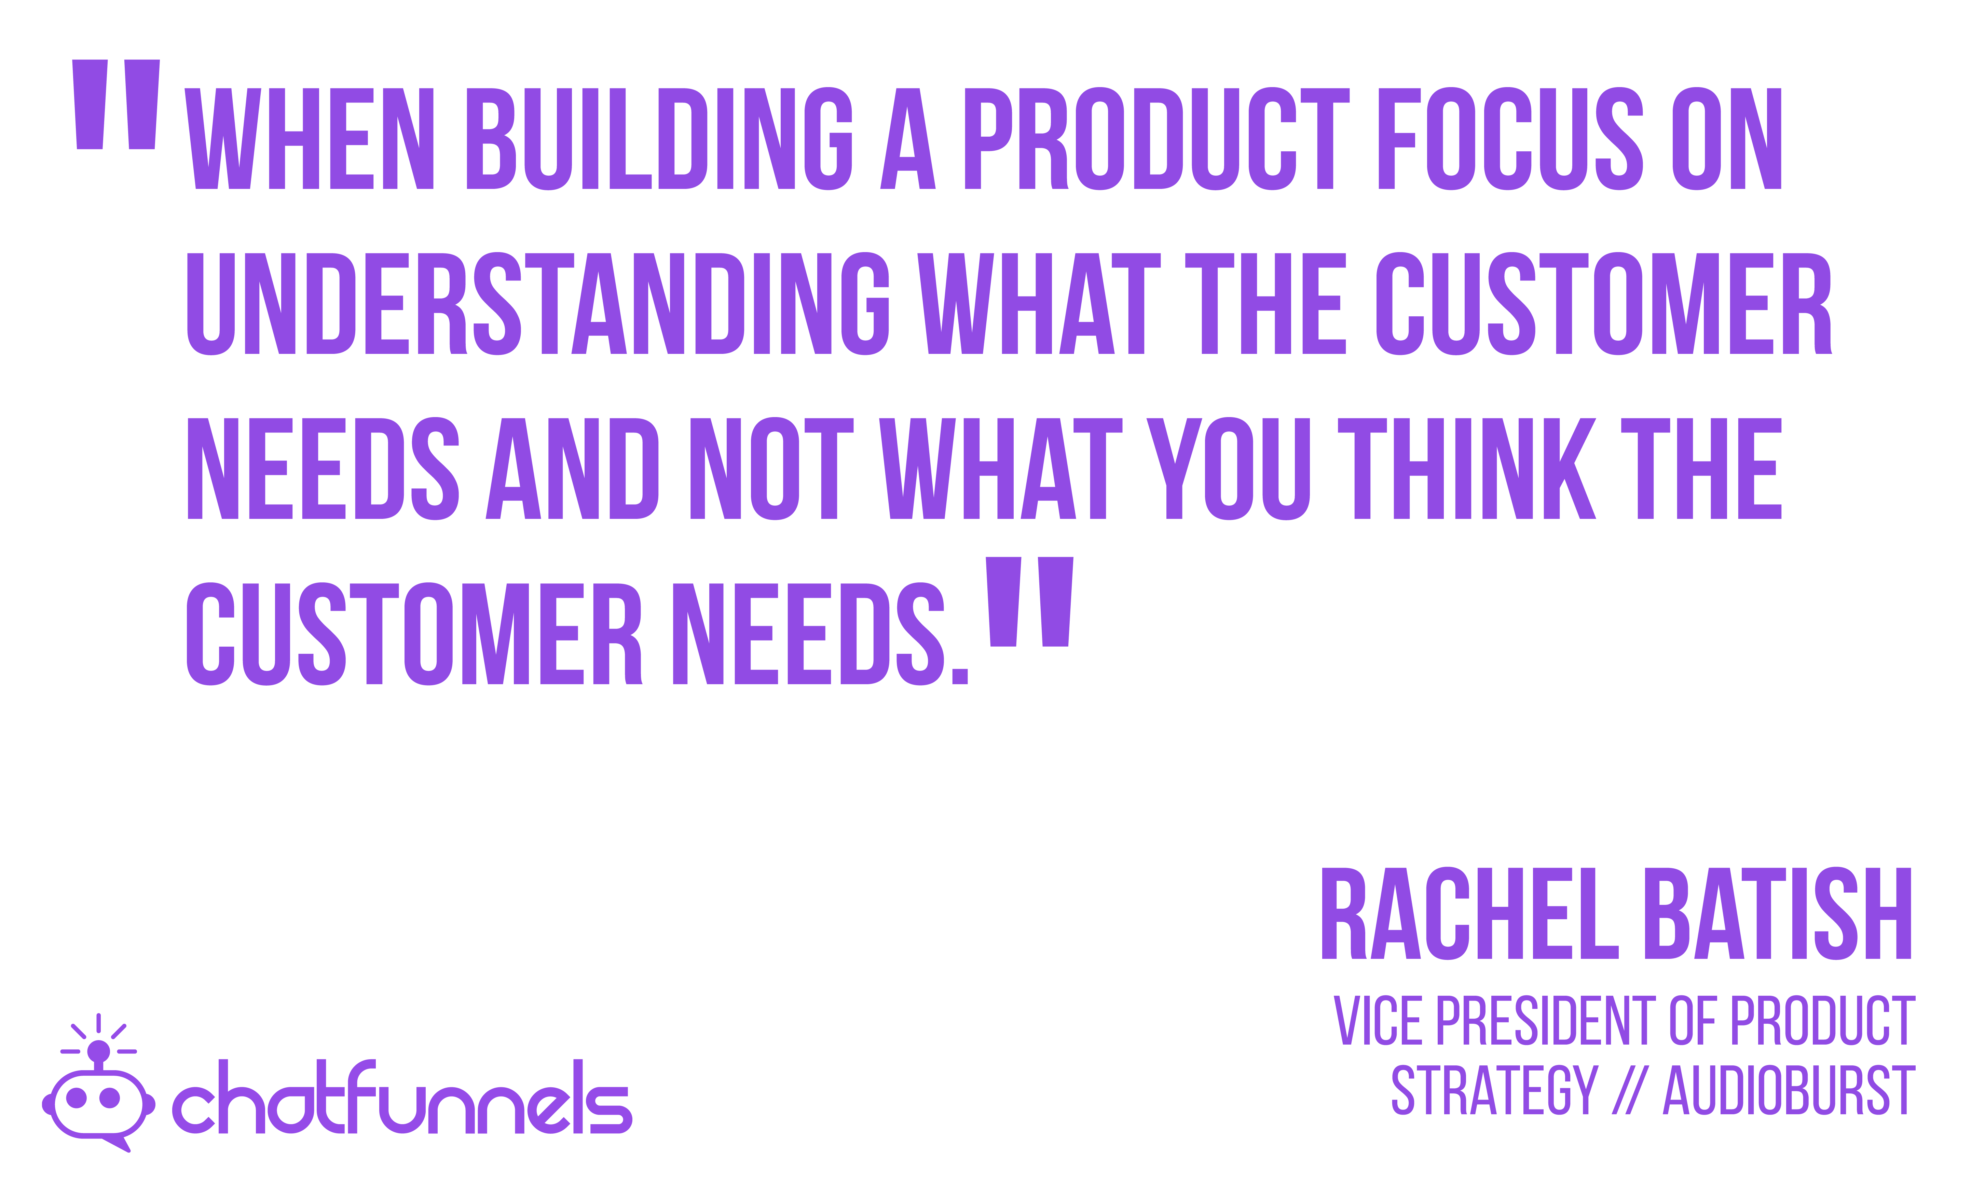 When building a product focus on understanding what the customer needs and not what you think the customer needs